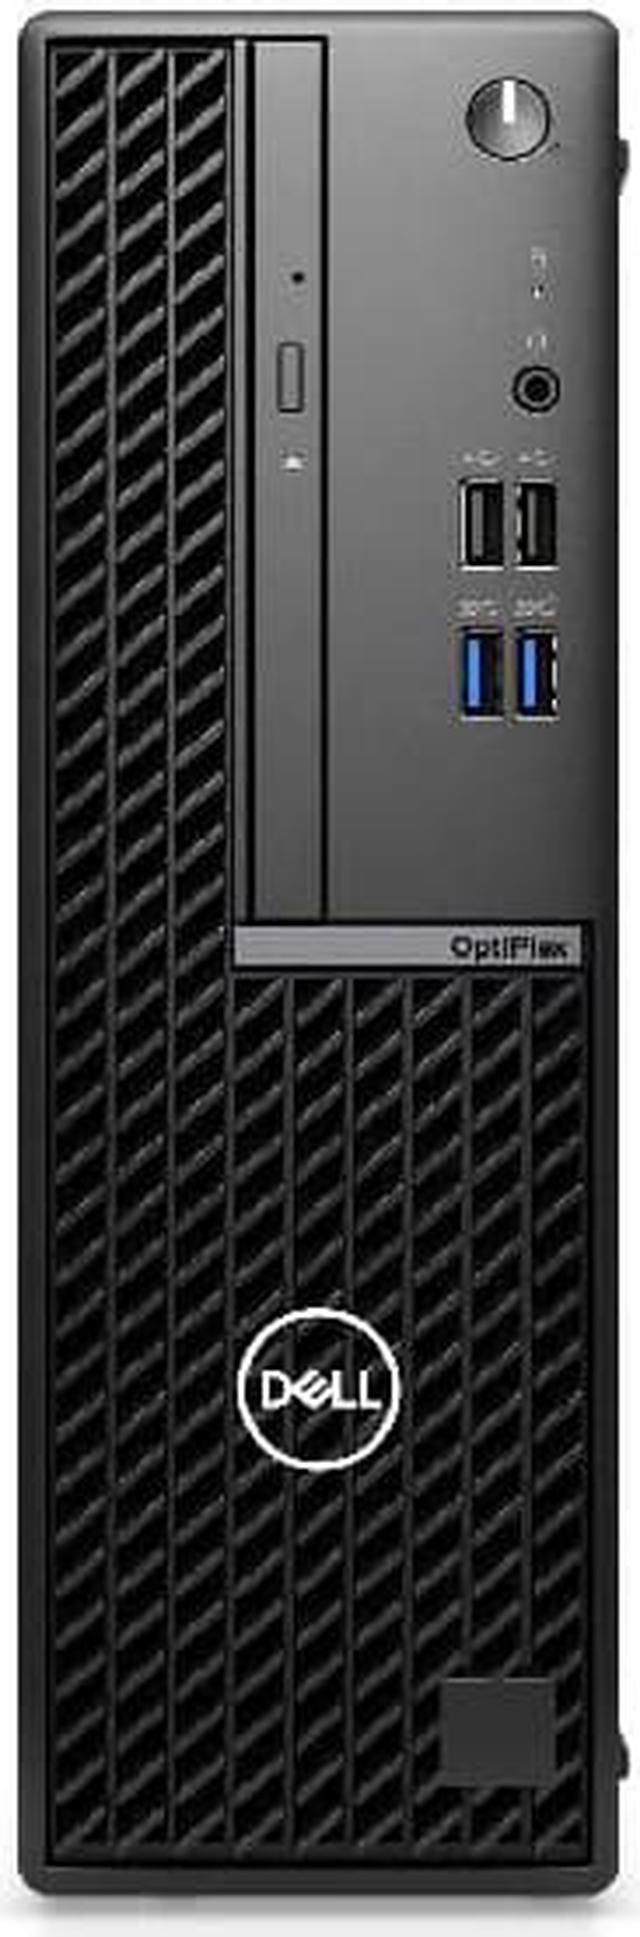 Dell Optiplex 7010 SFF, Intel Core i5-13500(6+8Cores/24MB/20T/2.5GHz to 4.8GHz),16GB(1x16)DDR4,512GB(M.2)NVMe SSD,Intel Integrated Graphics,noWiFi,Dell Optical Mouse - MS116,Dell Wired Keyboard KB216,180W,Ubuntu,3Yr ProSupport_3